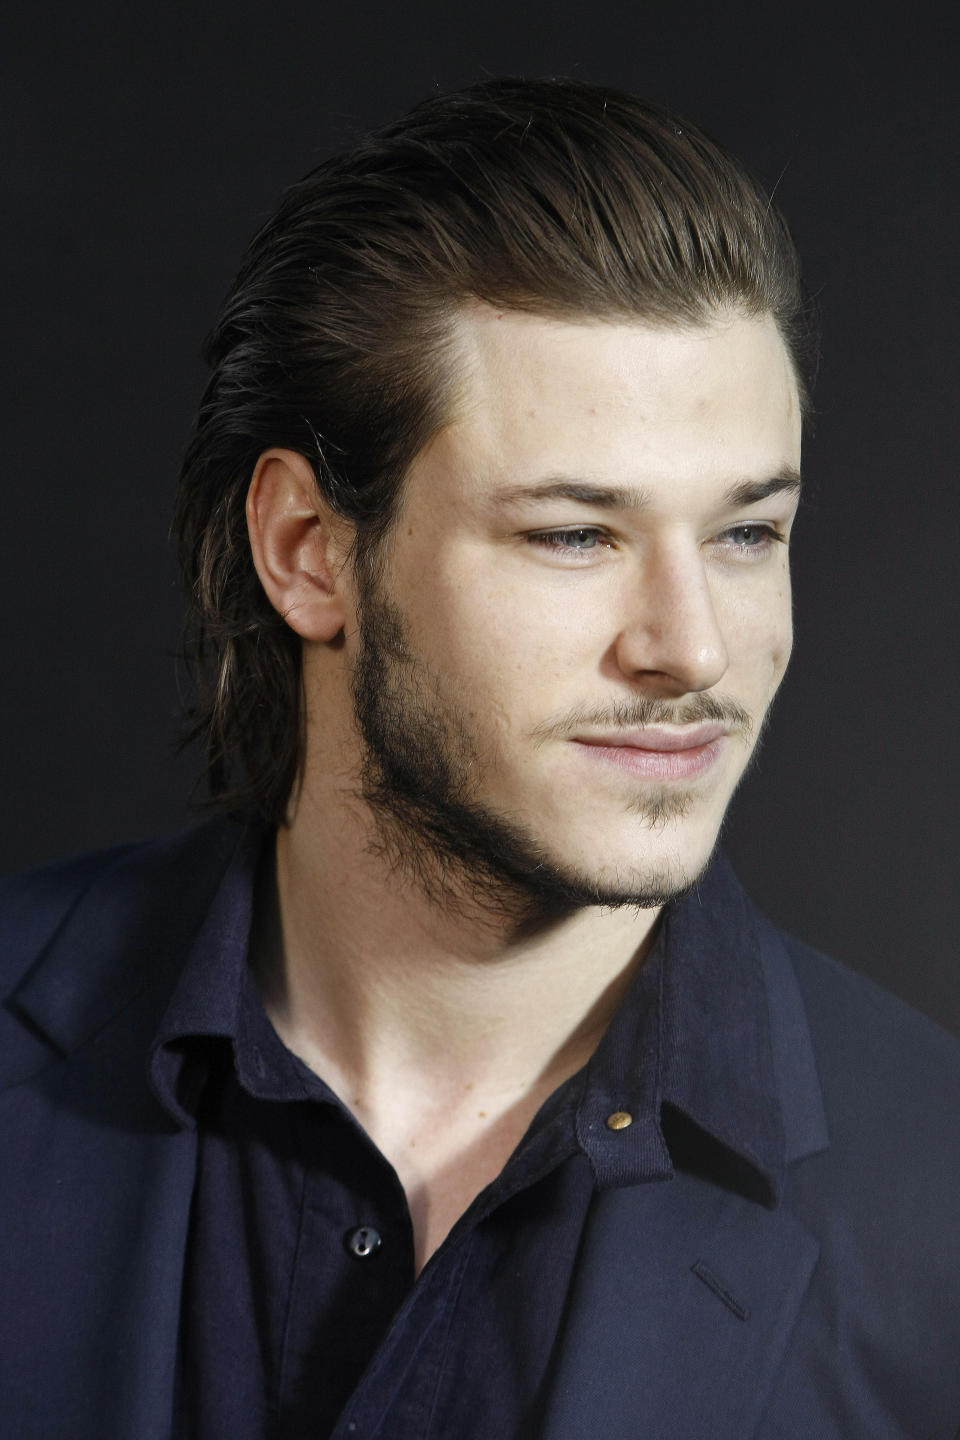 FILE - French actor Gaspard Ulliel appears at Chanel's Fall-Winter 2009-2010 ready-to-wear collection in Paris, on March 10, 2009. Ulliel died Wednesday, Jan. 19, 2022, after a skiing accident in the Alps, according to his agent's office. Ulliel, who was 37, was known for appearing in Chanel perfume ads as well as film and television roles. (AP Photo/Thibault Camus, File)